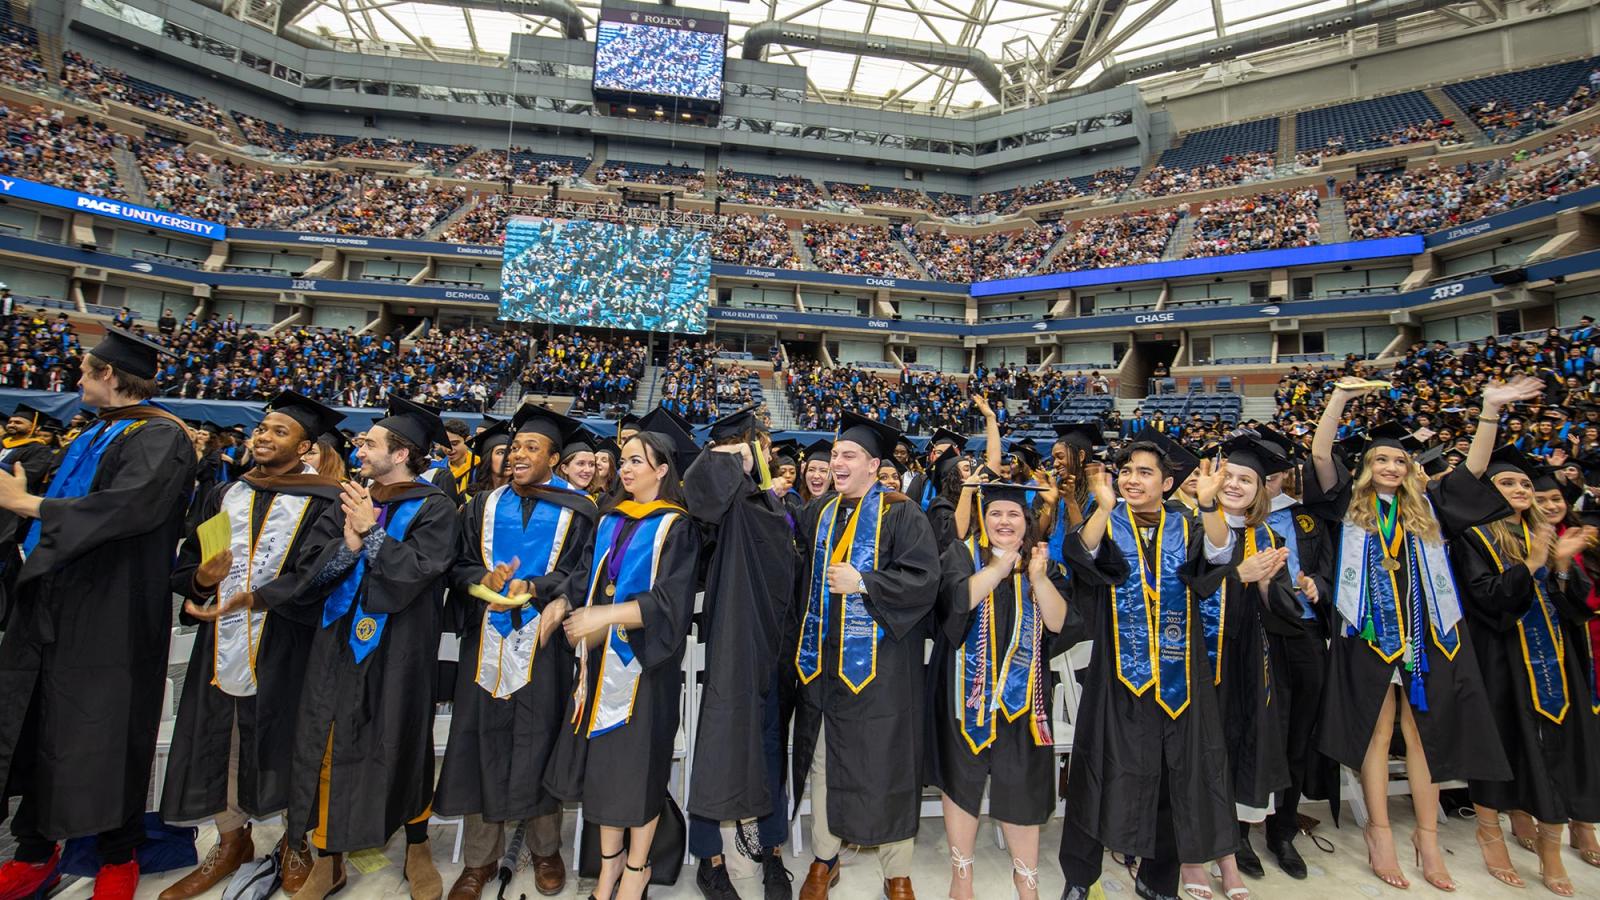 Students at Pace University Commencement in USTA Tennis Center